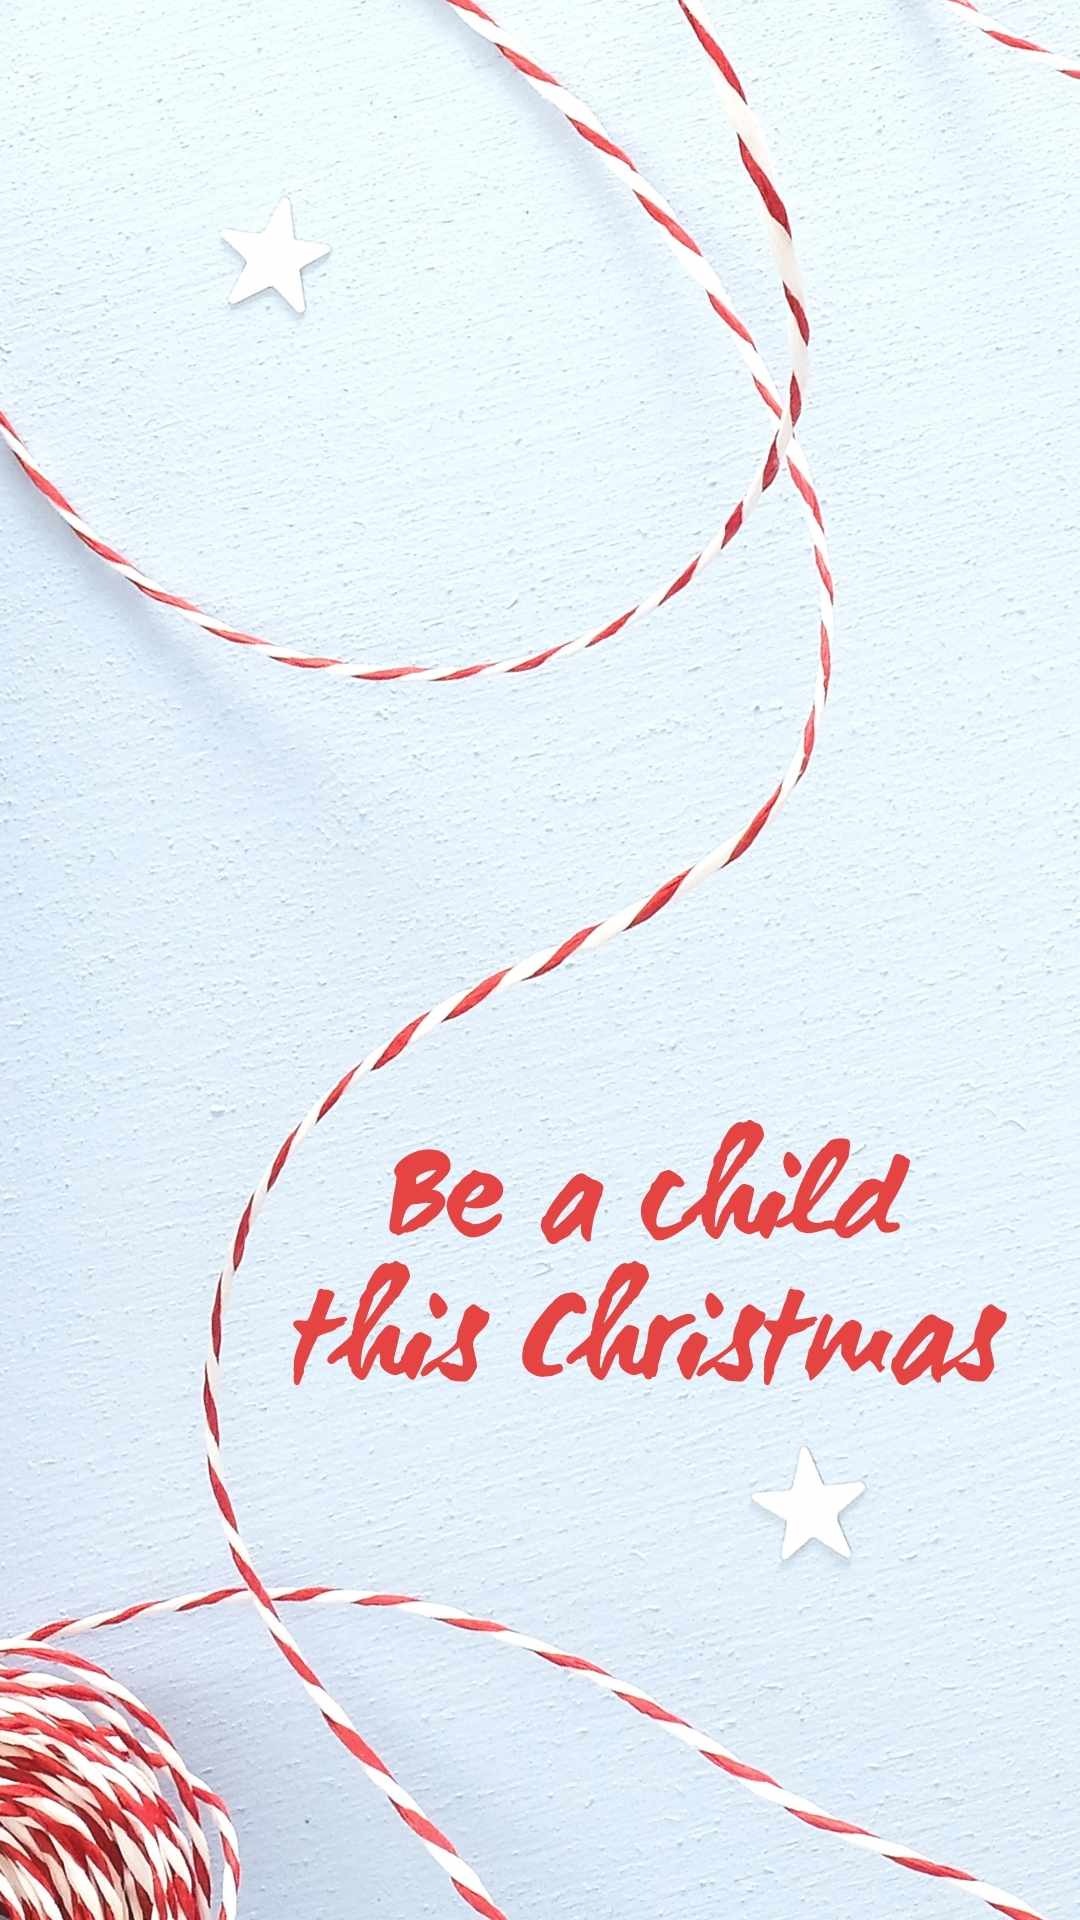 Be a Child this Christmas is iphone wallpaper on a blue holiday background